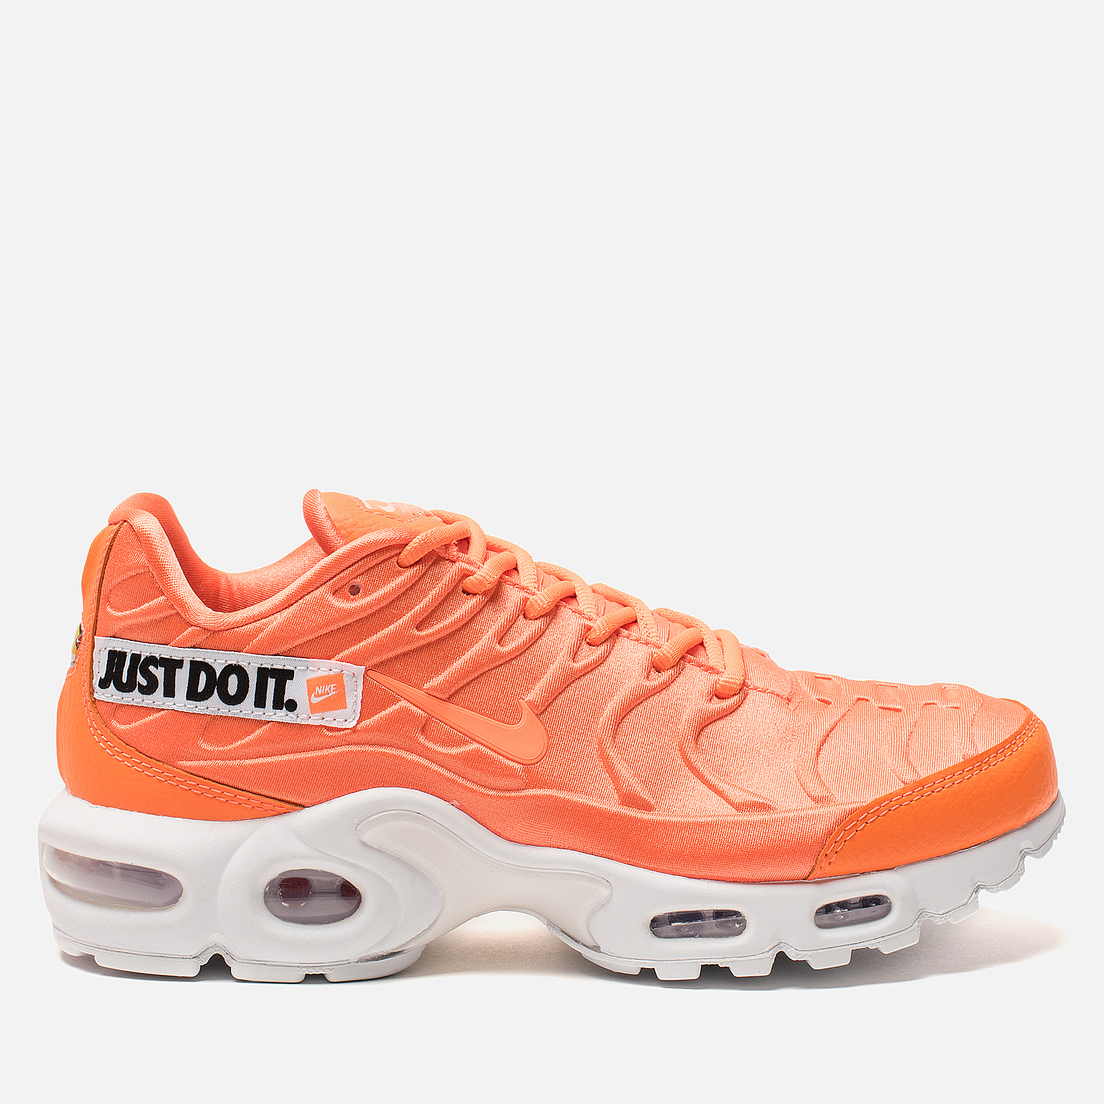 Nike Air Max Plus SE Just Do It 862201 